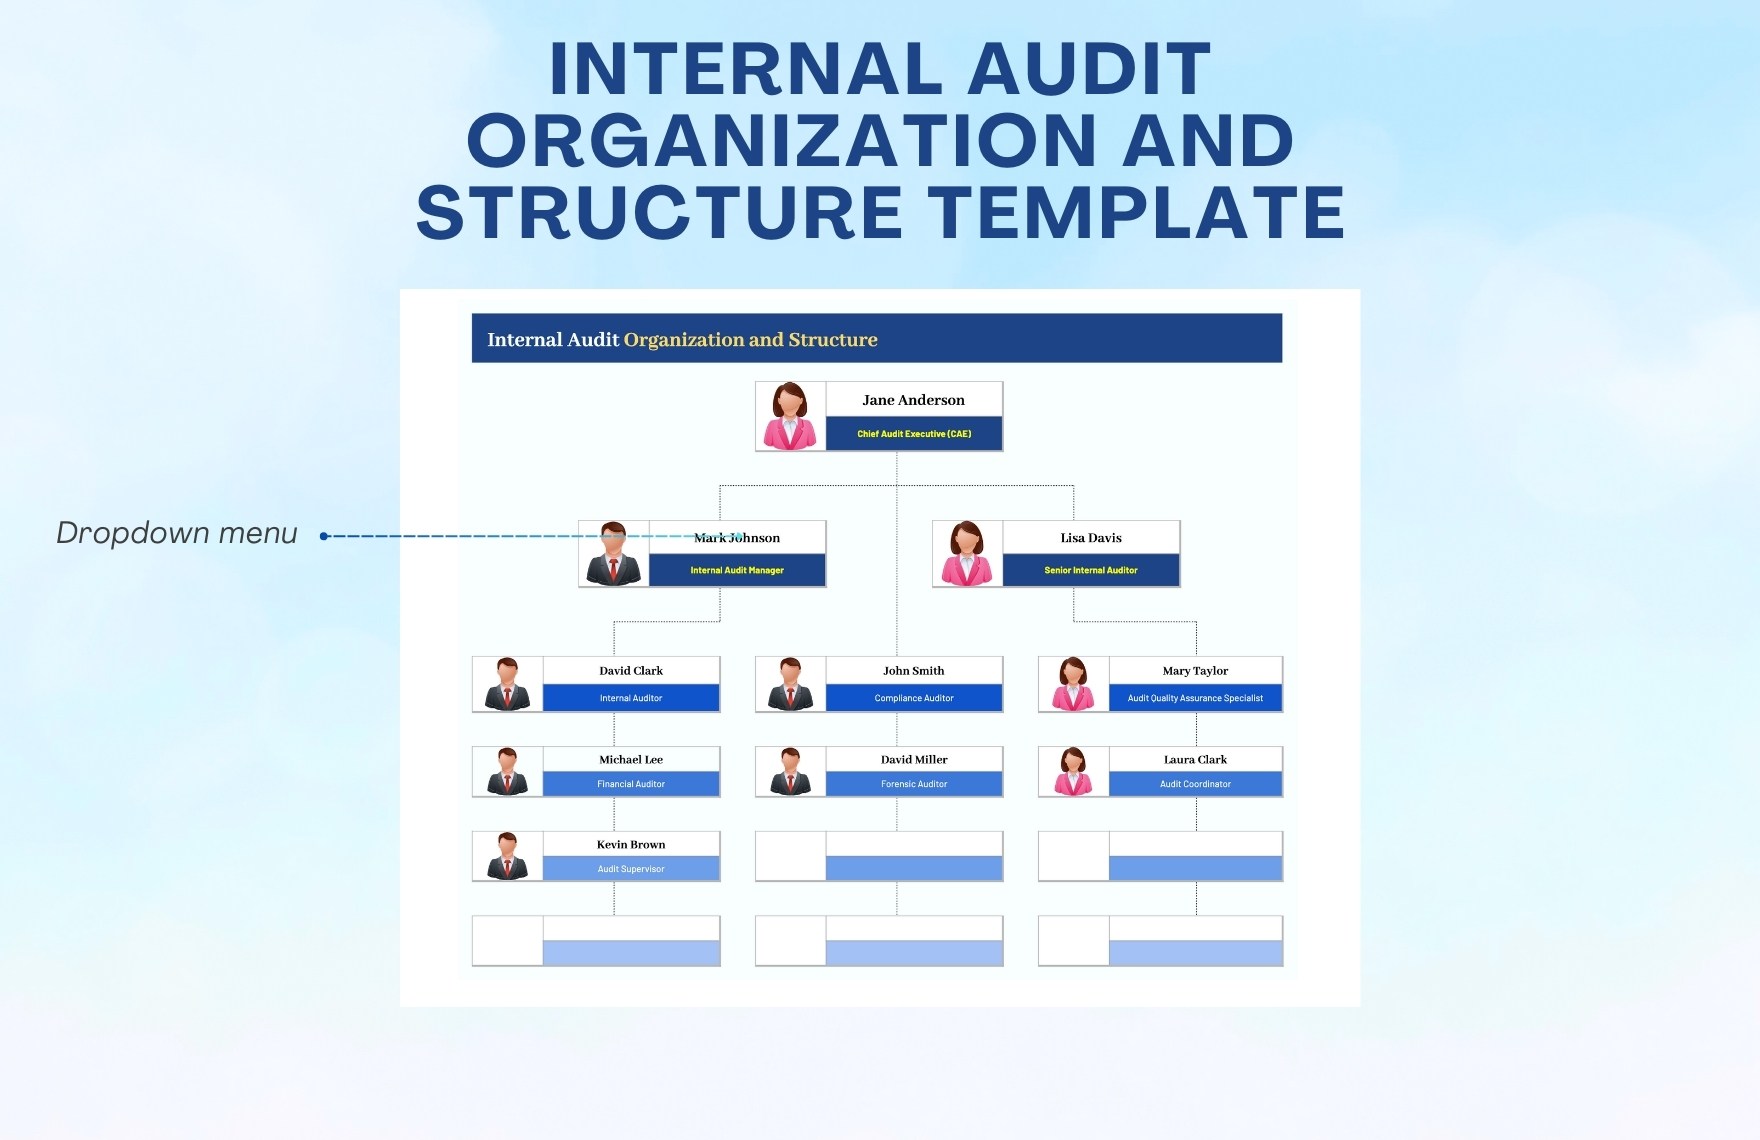 Internal Audit Organization and Structure Template